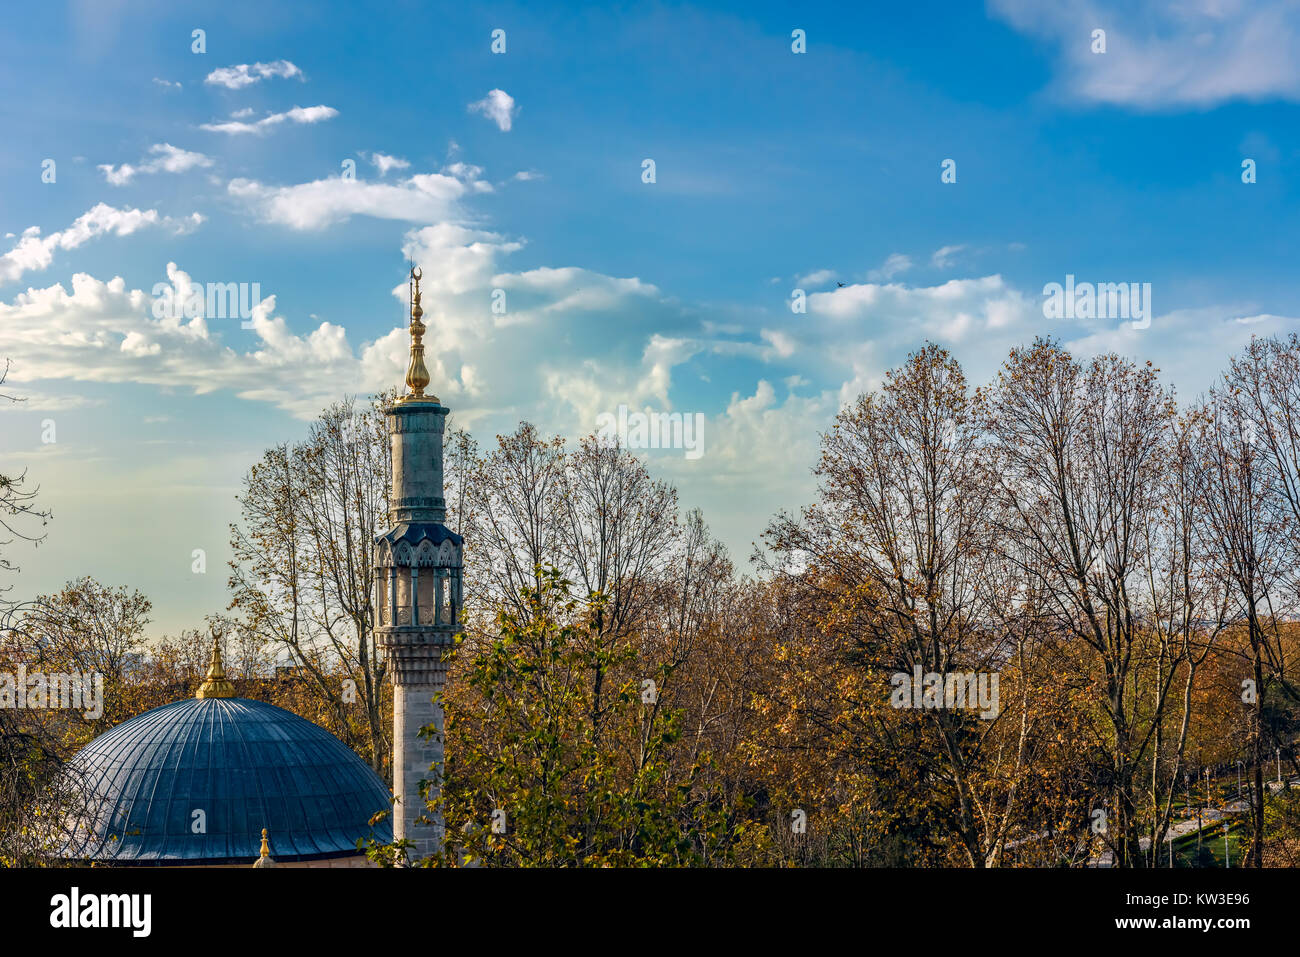 A mosque dome and its minaret in front of a grove with fallen reddish leaves under beautiful blue sky with white fluffy clouds Stock Photo